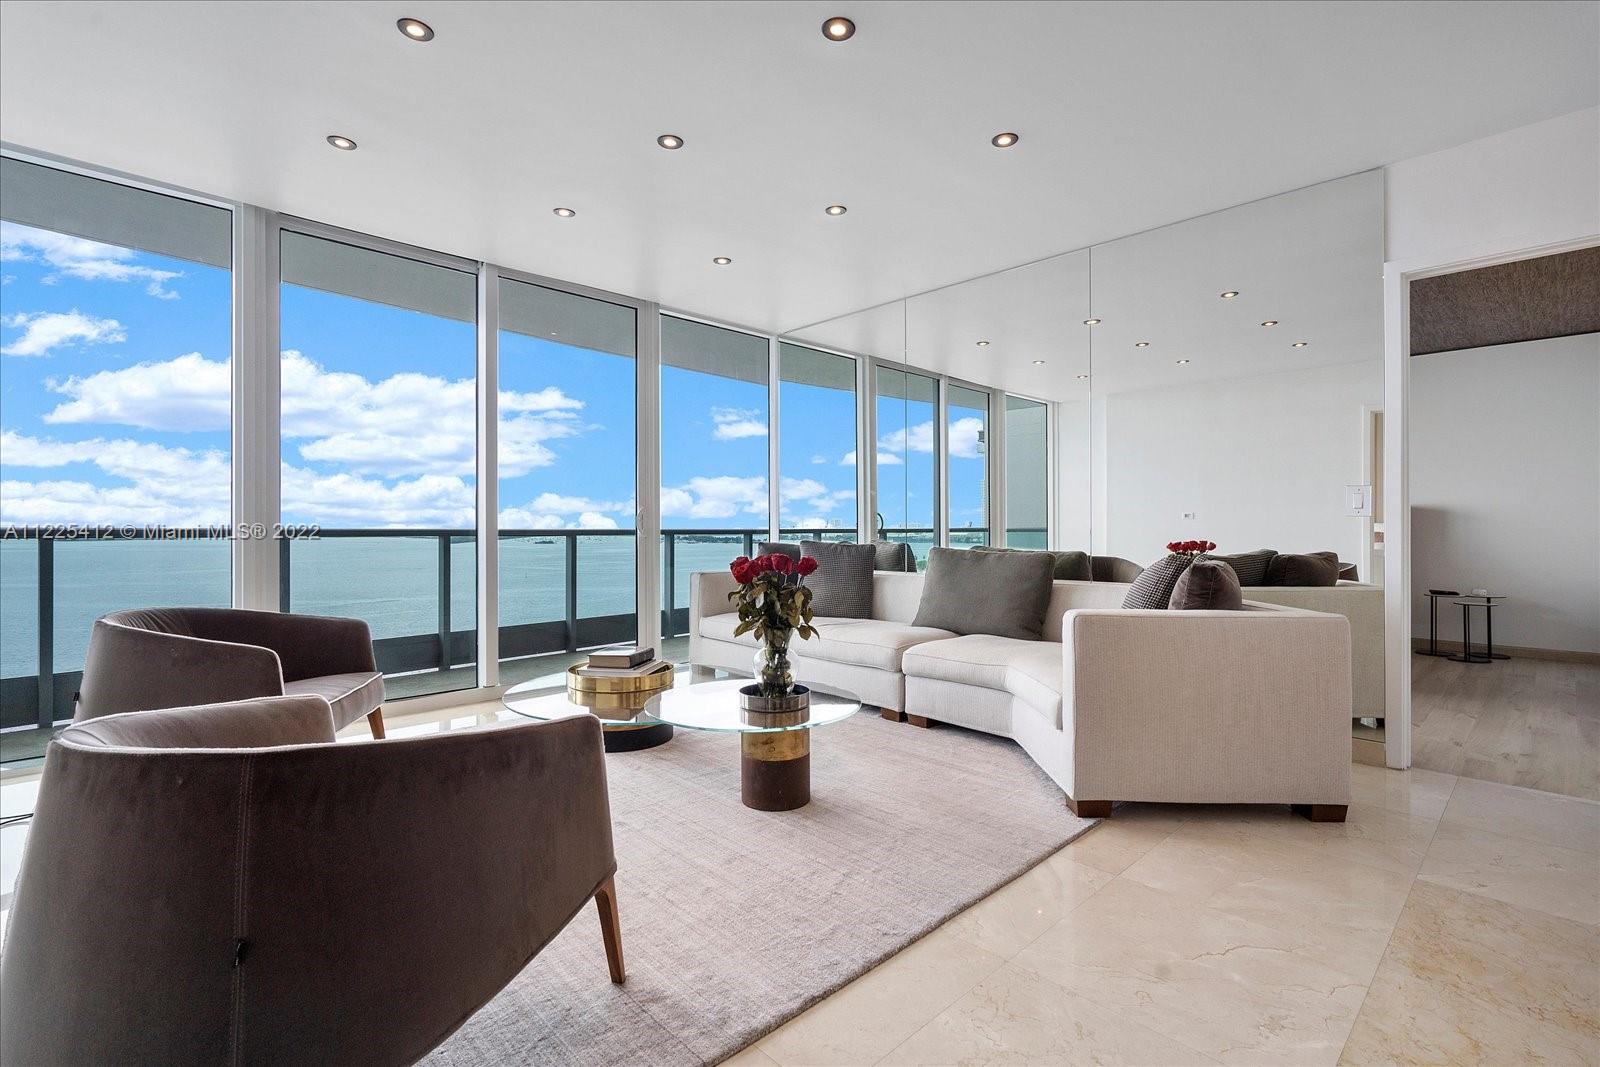 Welcome to Jade residence at Brickell bay , one of the few truly waterfront and luxury buildings in Brickell. Incredible opportunity to own a generous 2 bedrooms, 3 baths plus DEN condo with unobstructed Biscayne Bay views. Take private elevator to the unit to be welcomed with a recently updated foyer. Walk passed the newly installed front door to enjoy jaw dropping water views. Some of the key features include Italian cabinetry, marble floors throughout, new mirrors in living room reflecting bay views, built in closets and electric blackout curtains. State of the art amenities including two infinity pools, fitness center and spa, business center, sky party room and much more. Bring your client to feel a VIP service in the quiet part of Brickell, yet steps from it all.